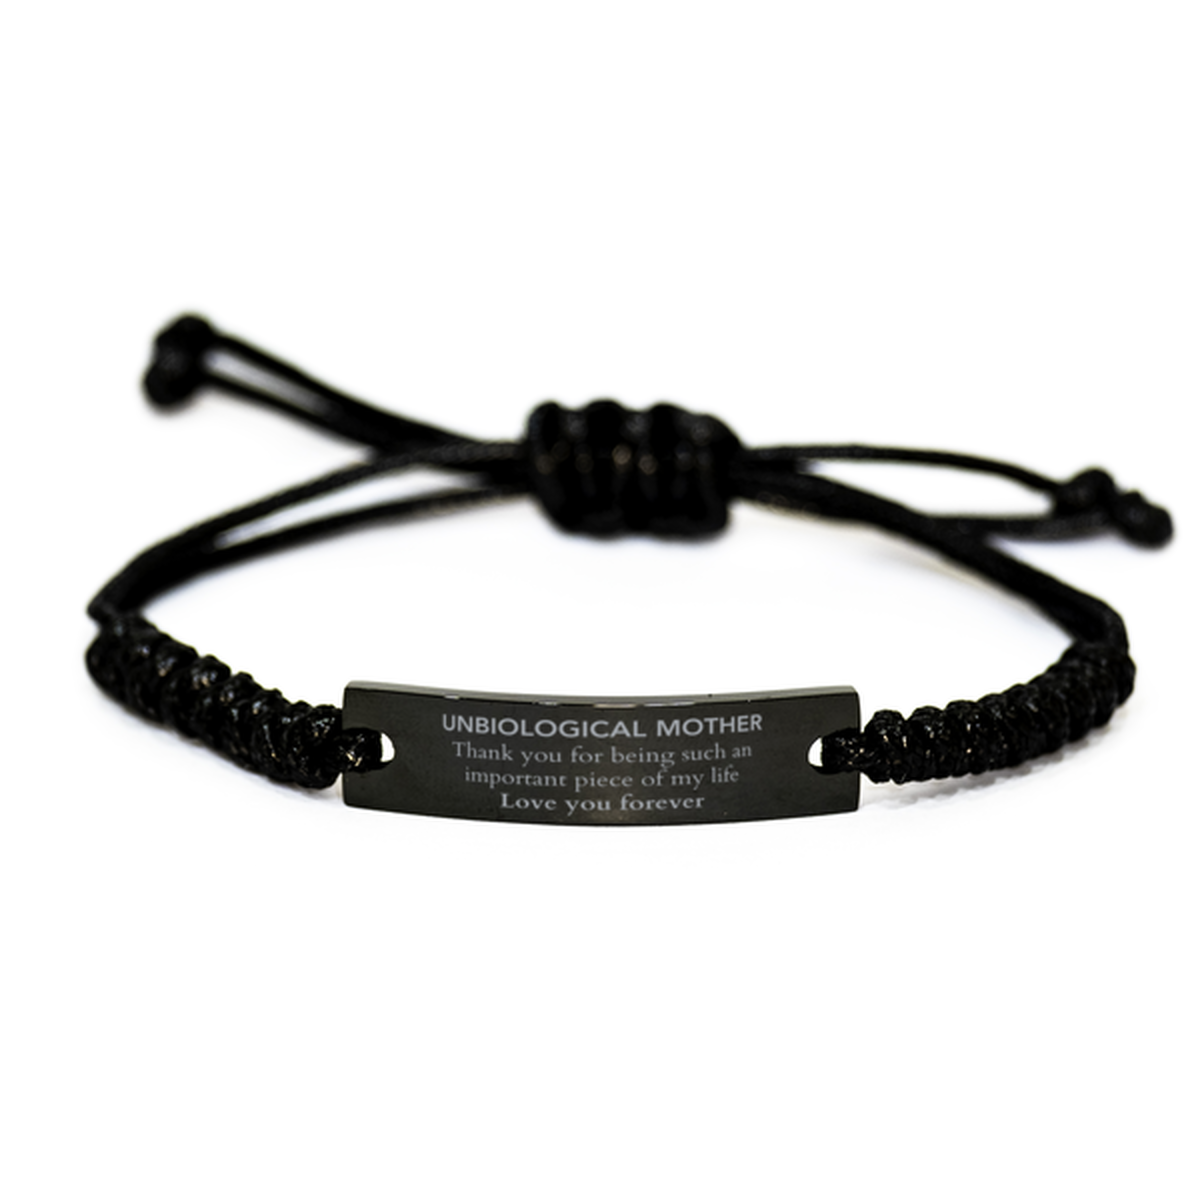 Appropriate Unbiological Mother Black Rope Bracelet Epic Birthday Gifts for Unbiological Mother Thank you for being such an important piece of my life Unbiological Mother Christmas Mothers Fathers Day